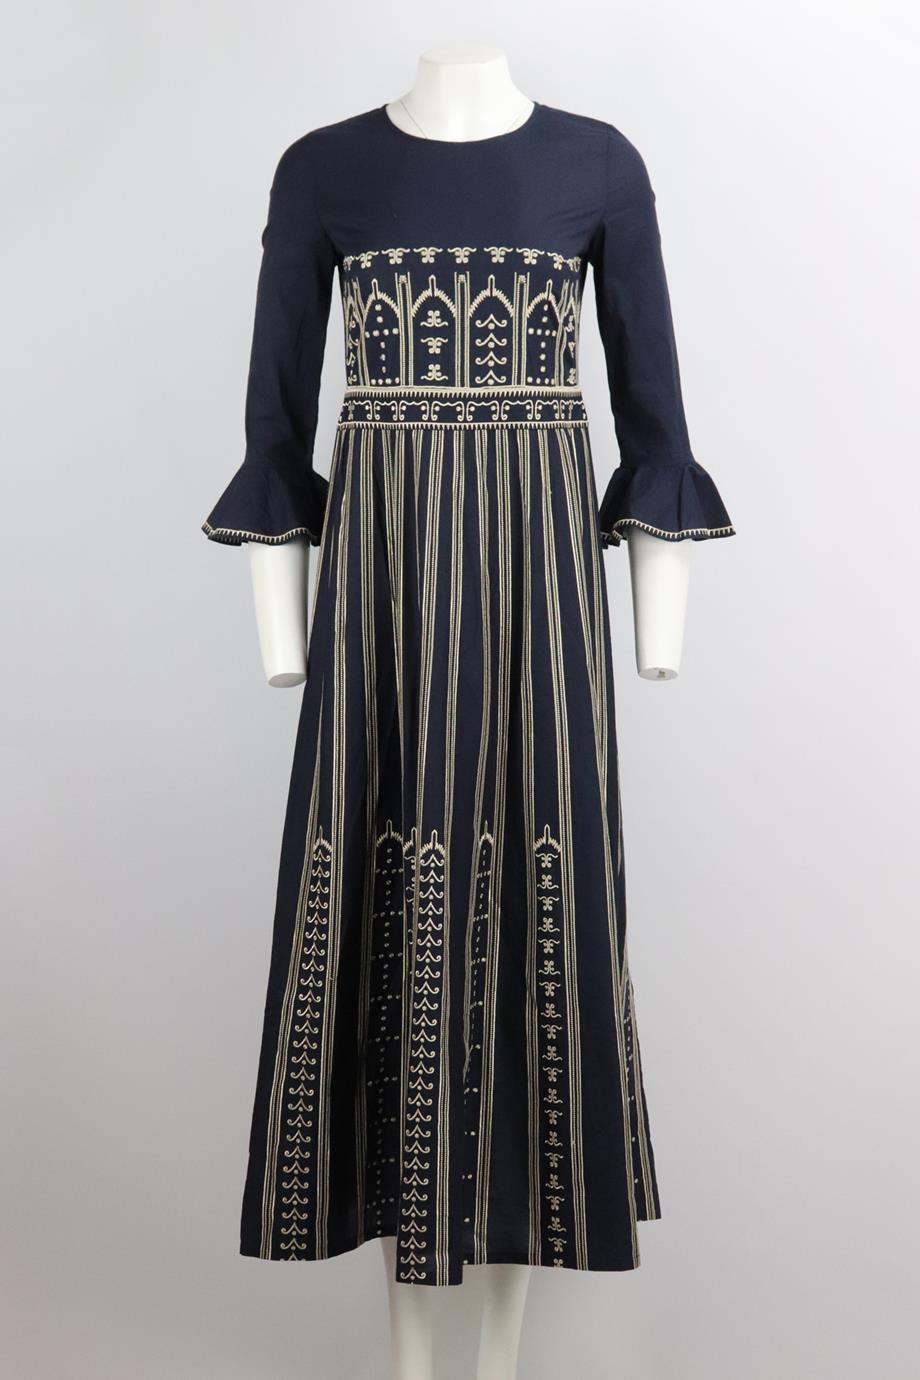 Emporio Sirenuse ruffled embroidered cotton voile maxi dress. Blue and beige. Long sleeve, crewneck. Zip fastening at back. 100% Cotton. Size: IT 38 (UK 6, US 2, FR 34). Bust: 33 in. Waist: 29 in. Hips: 52 in. Length: 52.4 in. Very good condition -